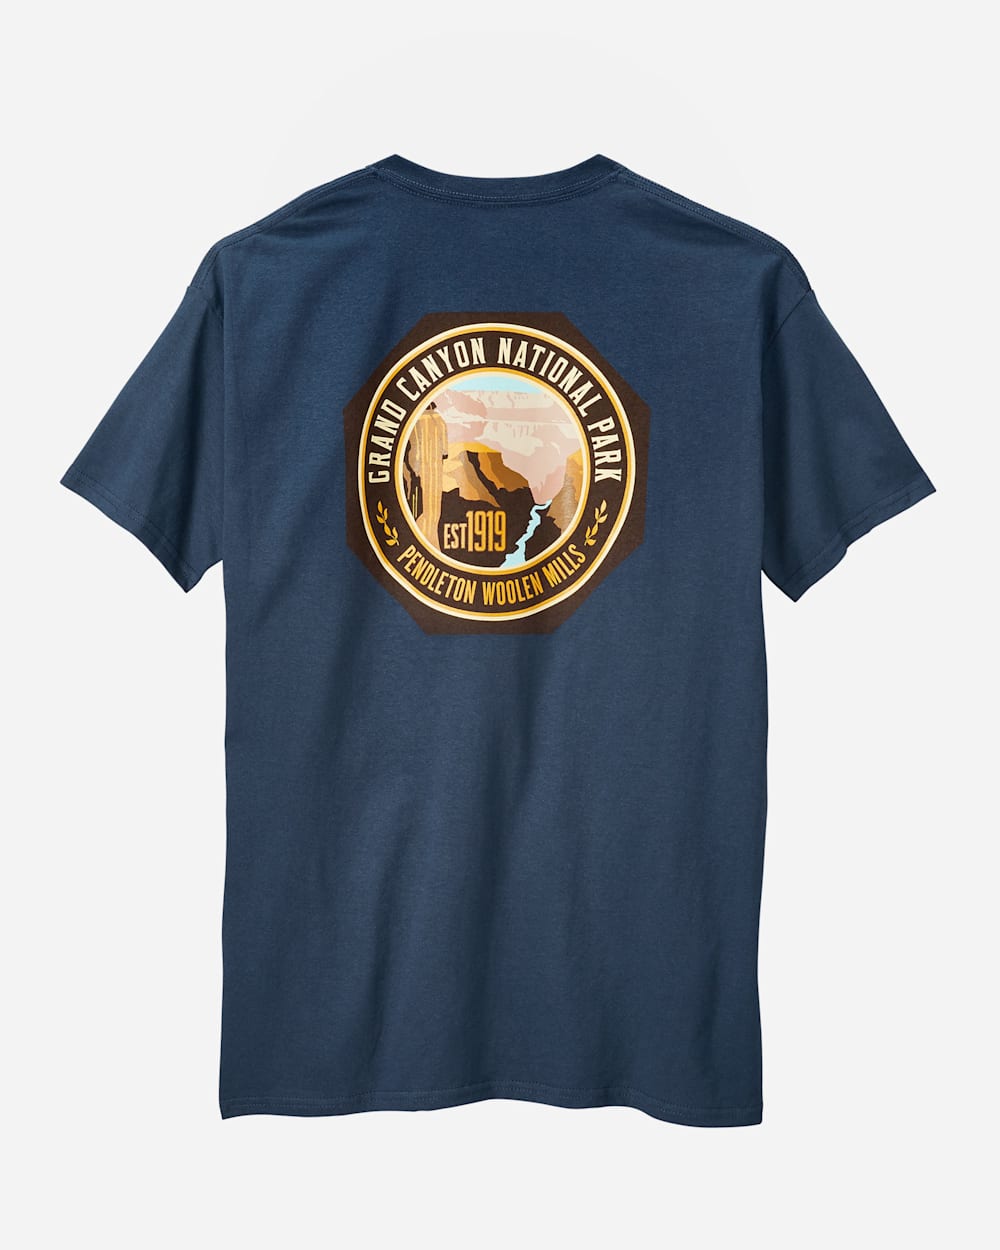 ALTERNATE VIEW OF MEN'S GRAND CANYON PARK TEE IN NAVY image number 1